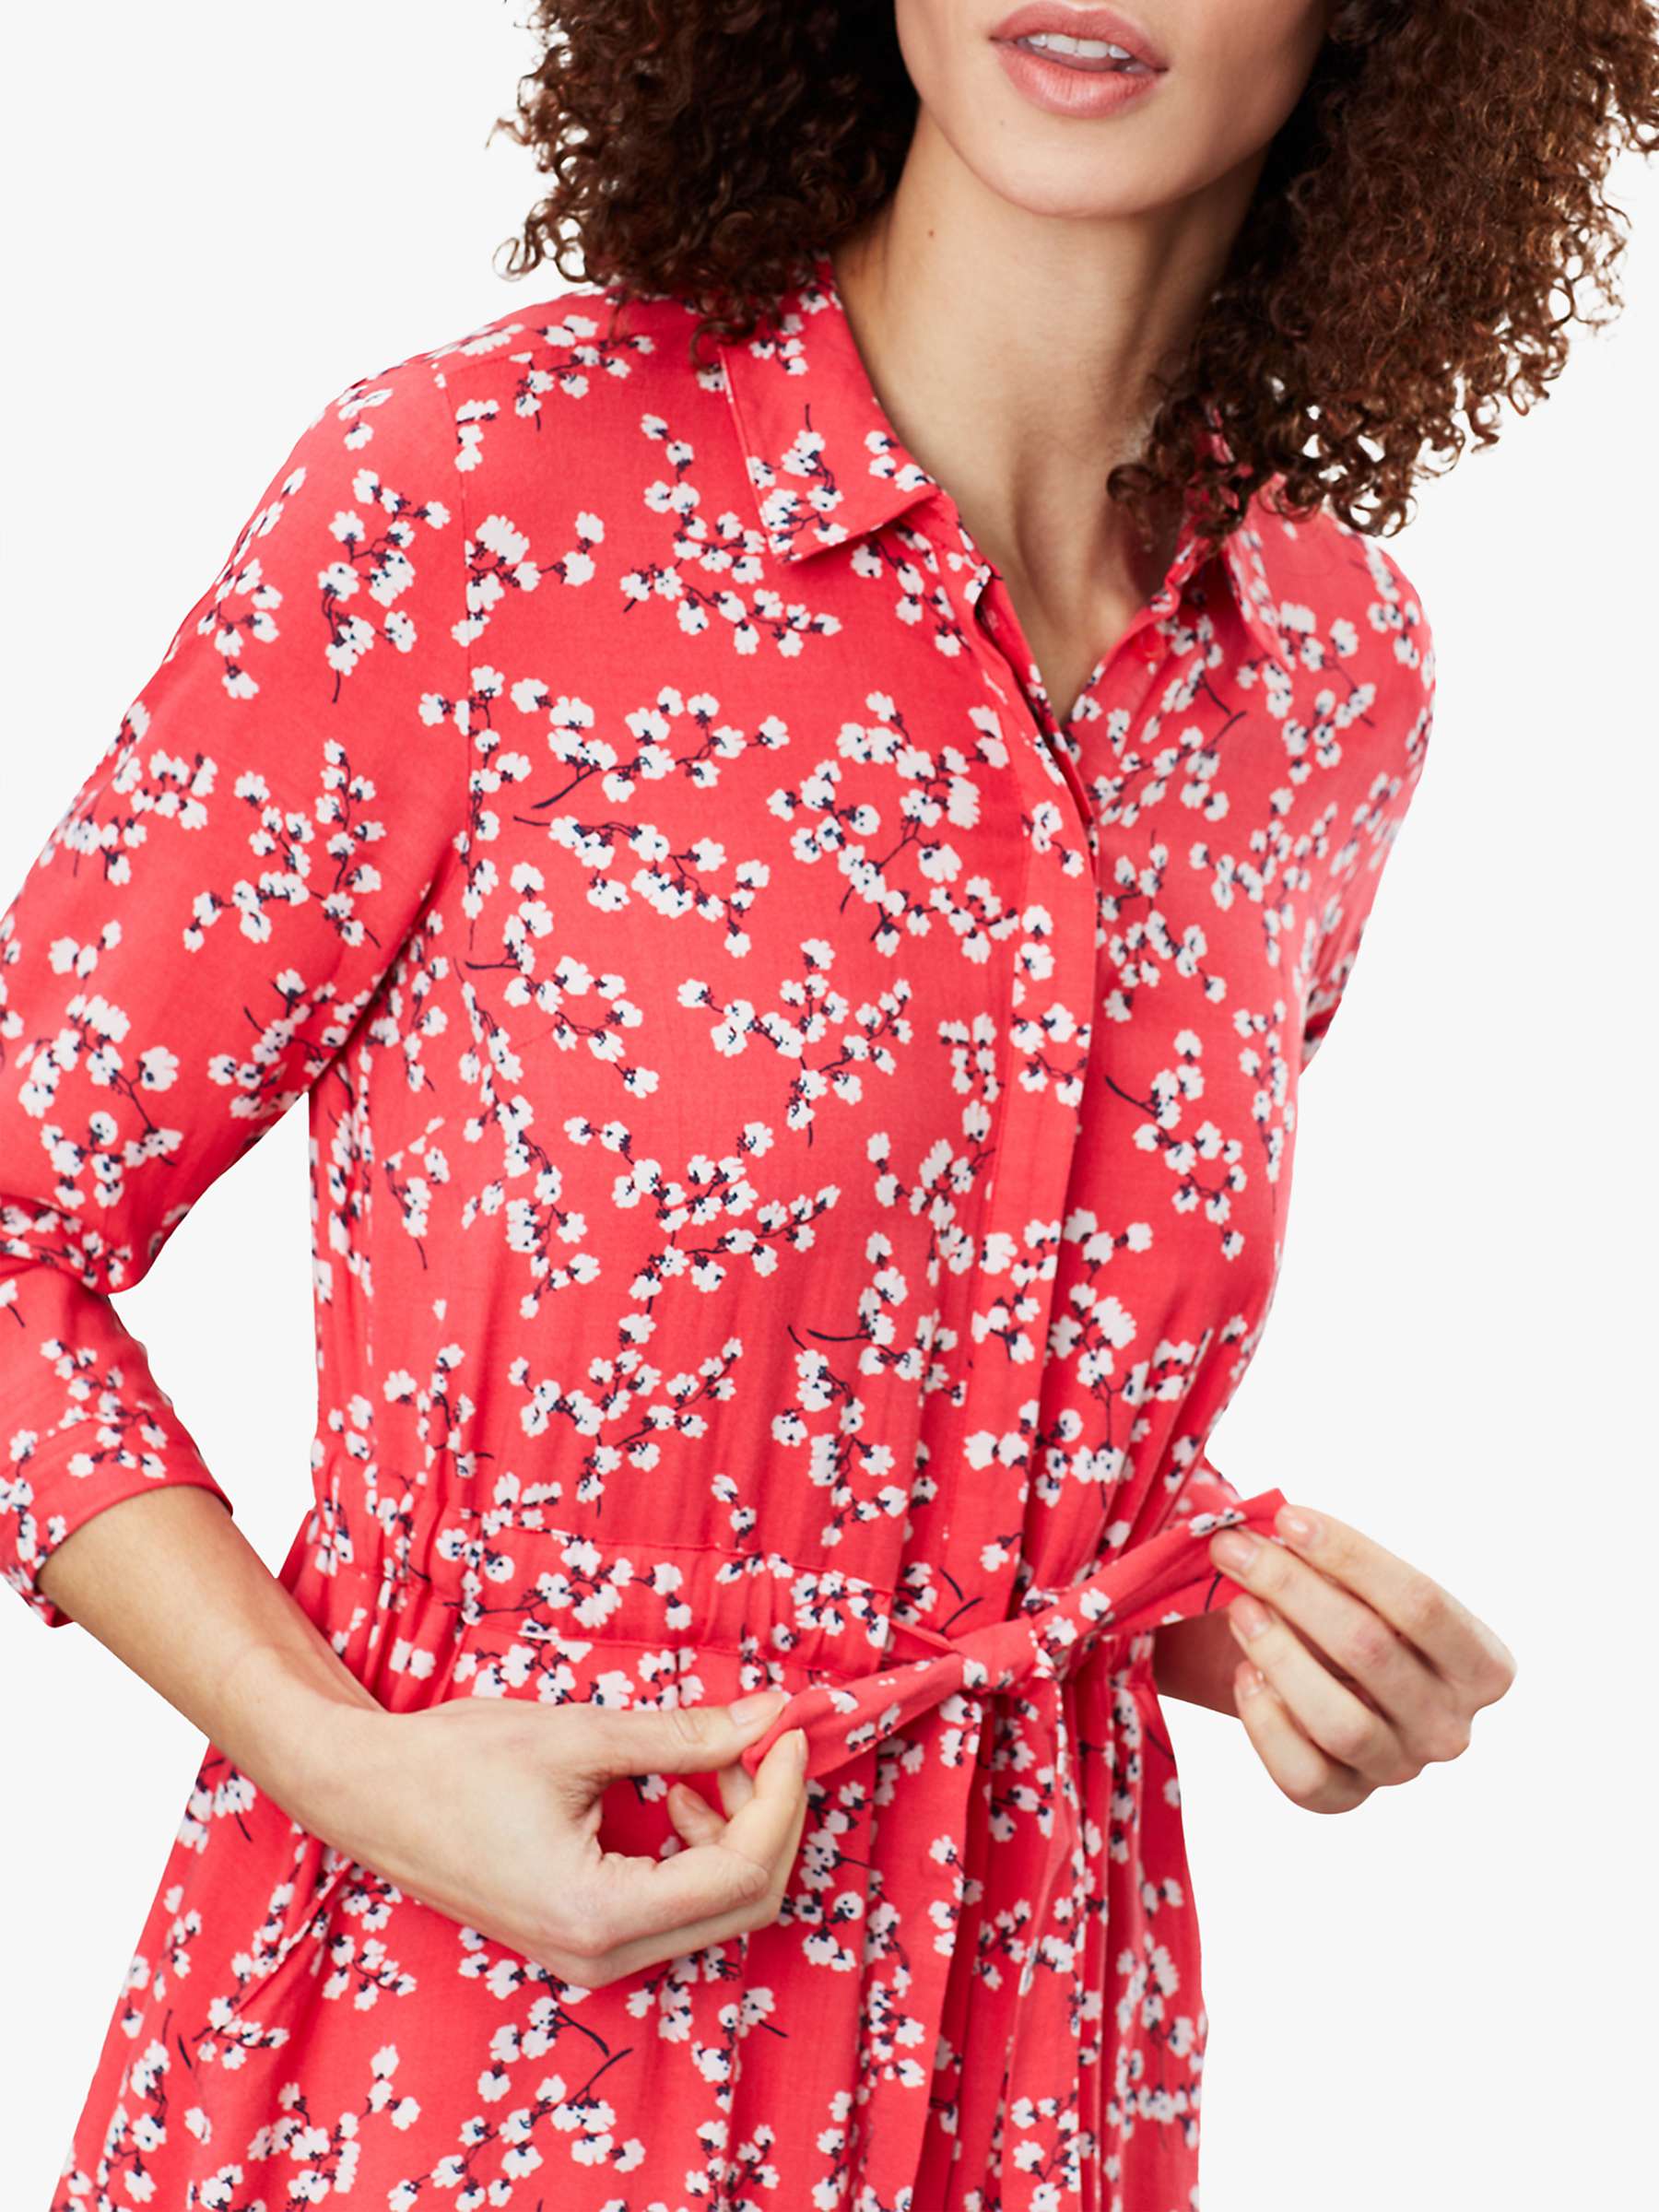 Joules Winslet Floral Button Dress, Red Ditsy at John